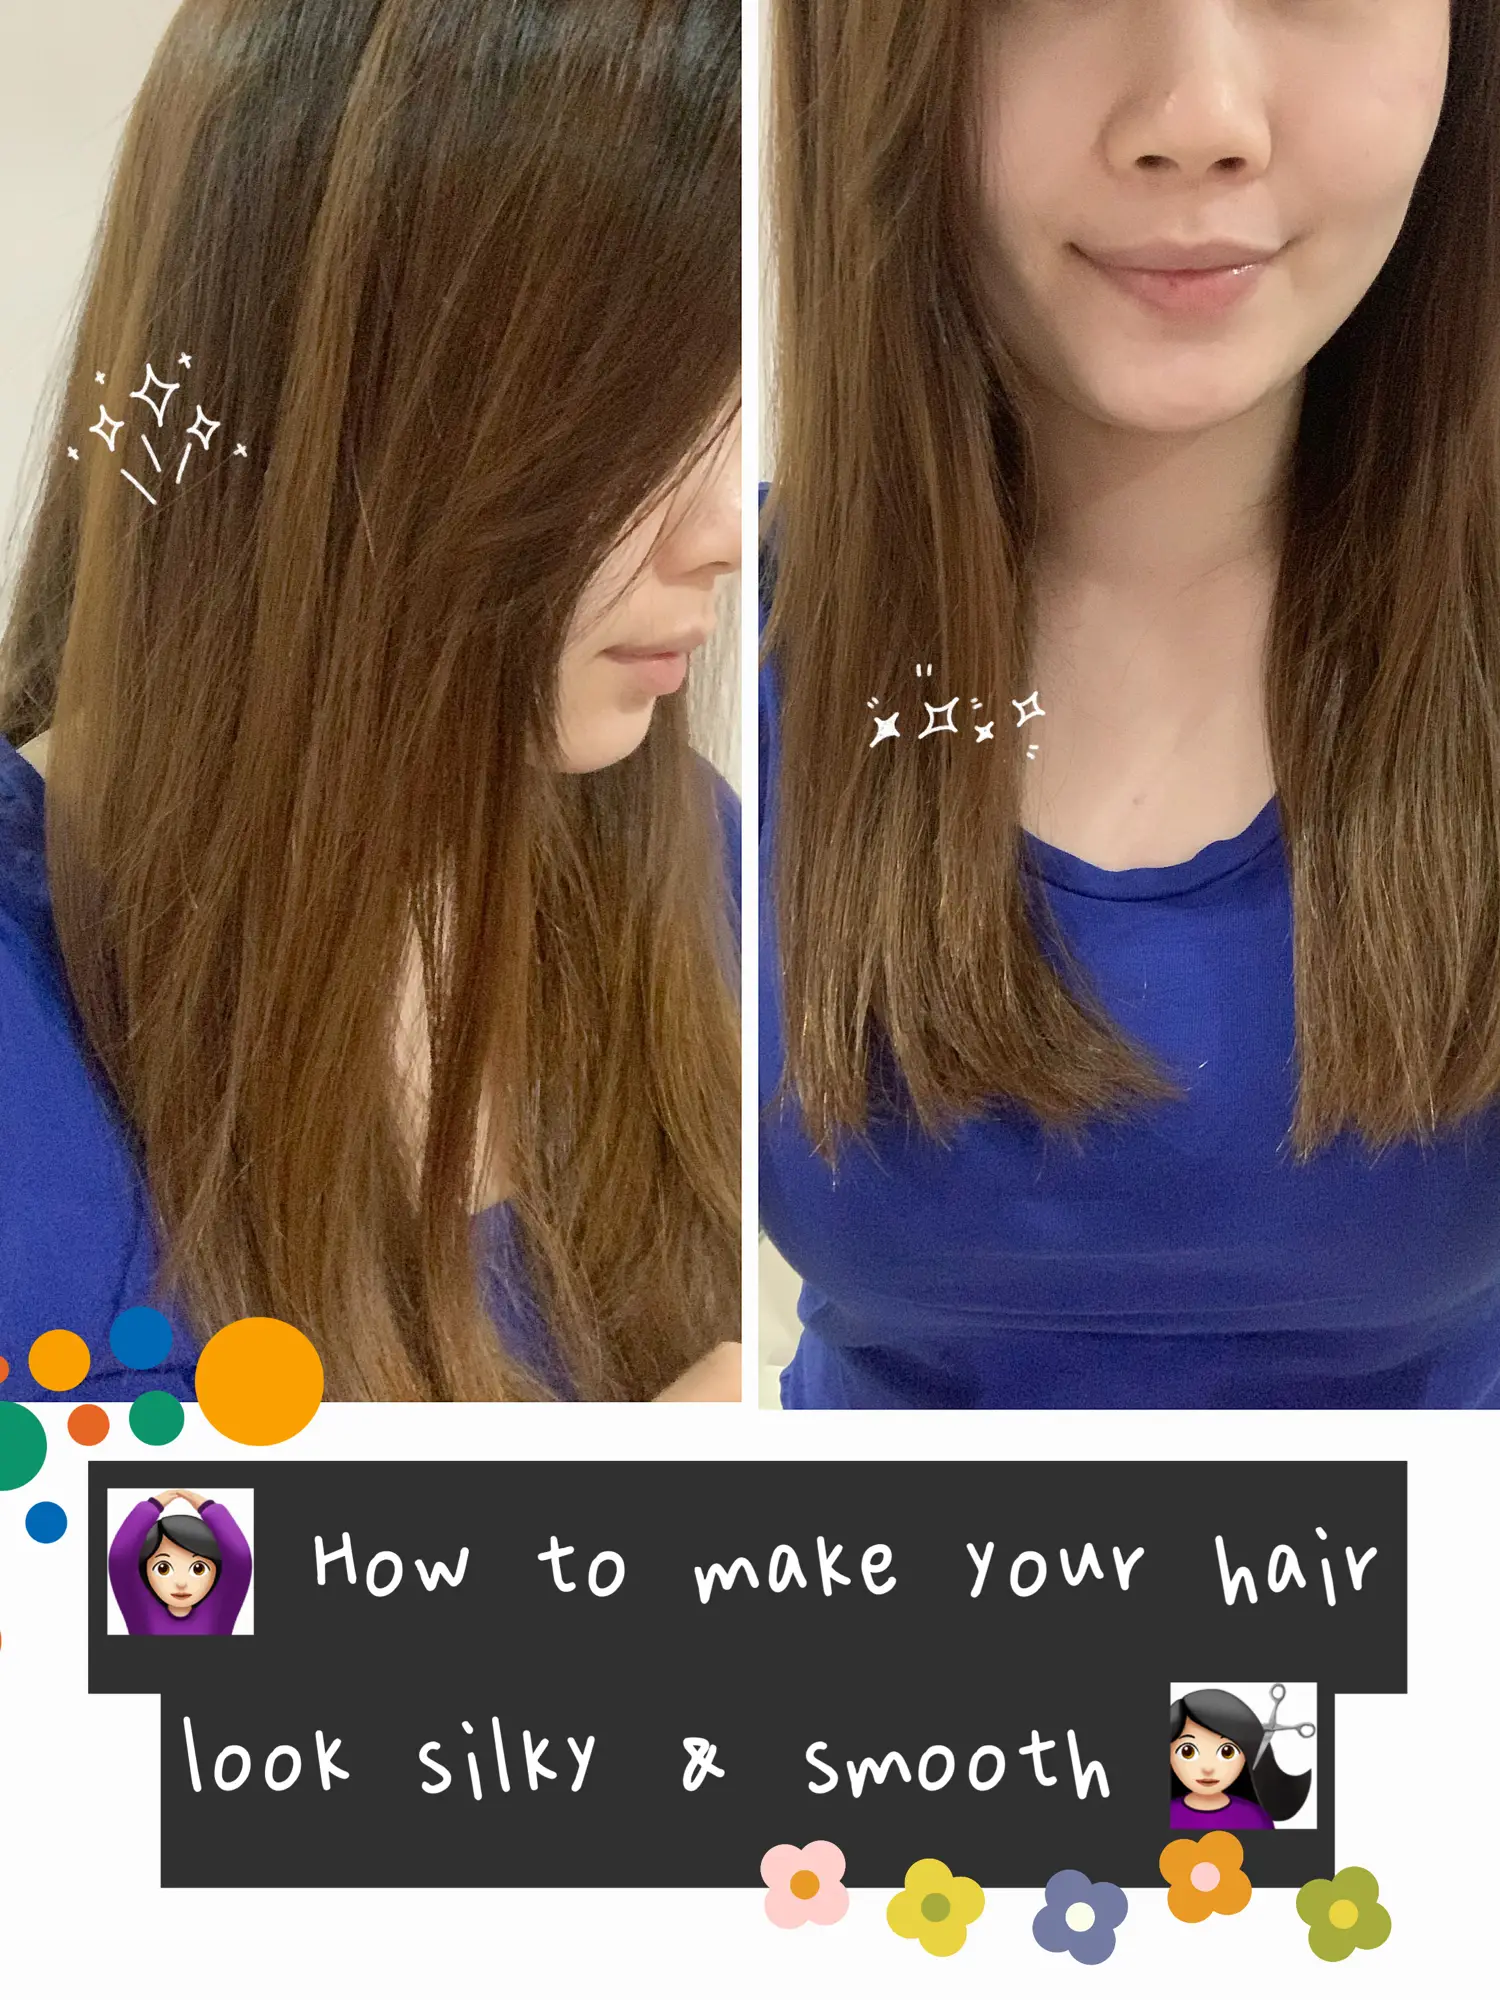 💇🏻‍♀️ How to make your hair look silky & smooth 🙆🏻‍♀️ | Gallery posted  by EmOoi | Lemon8